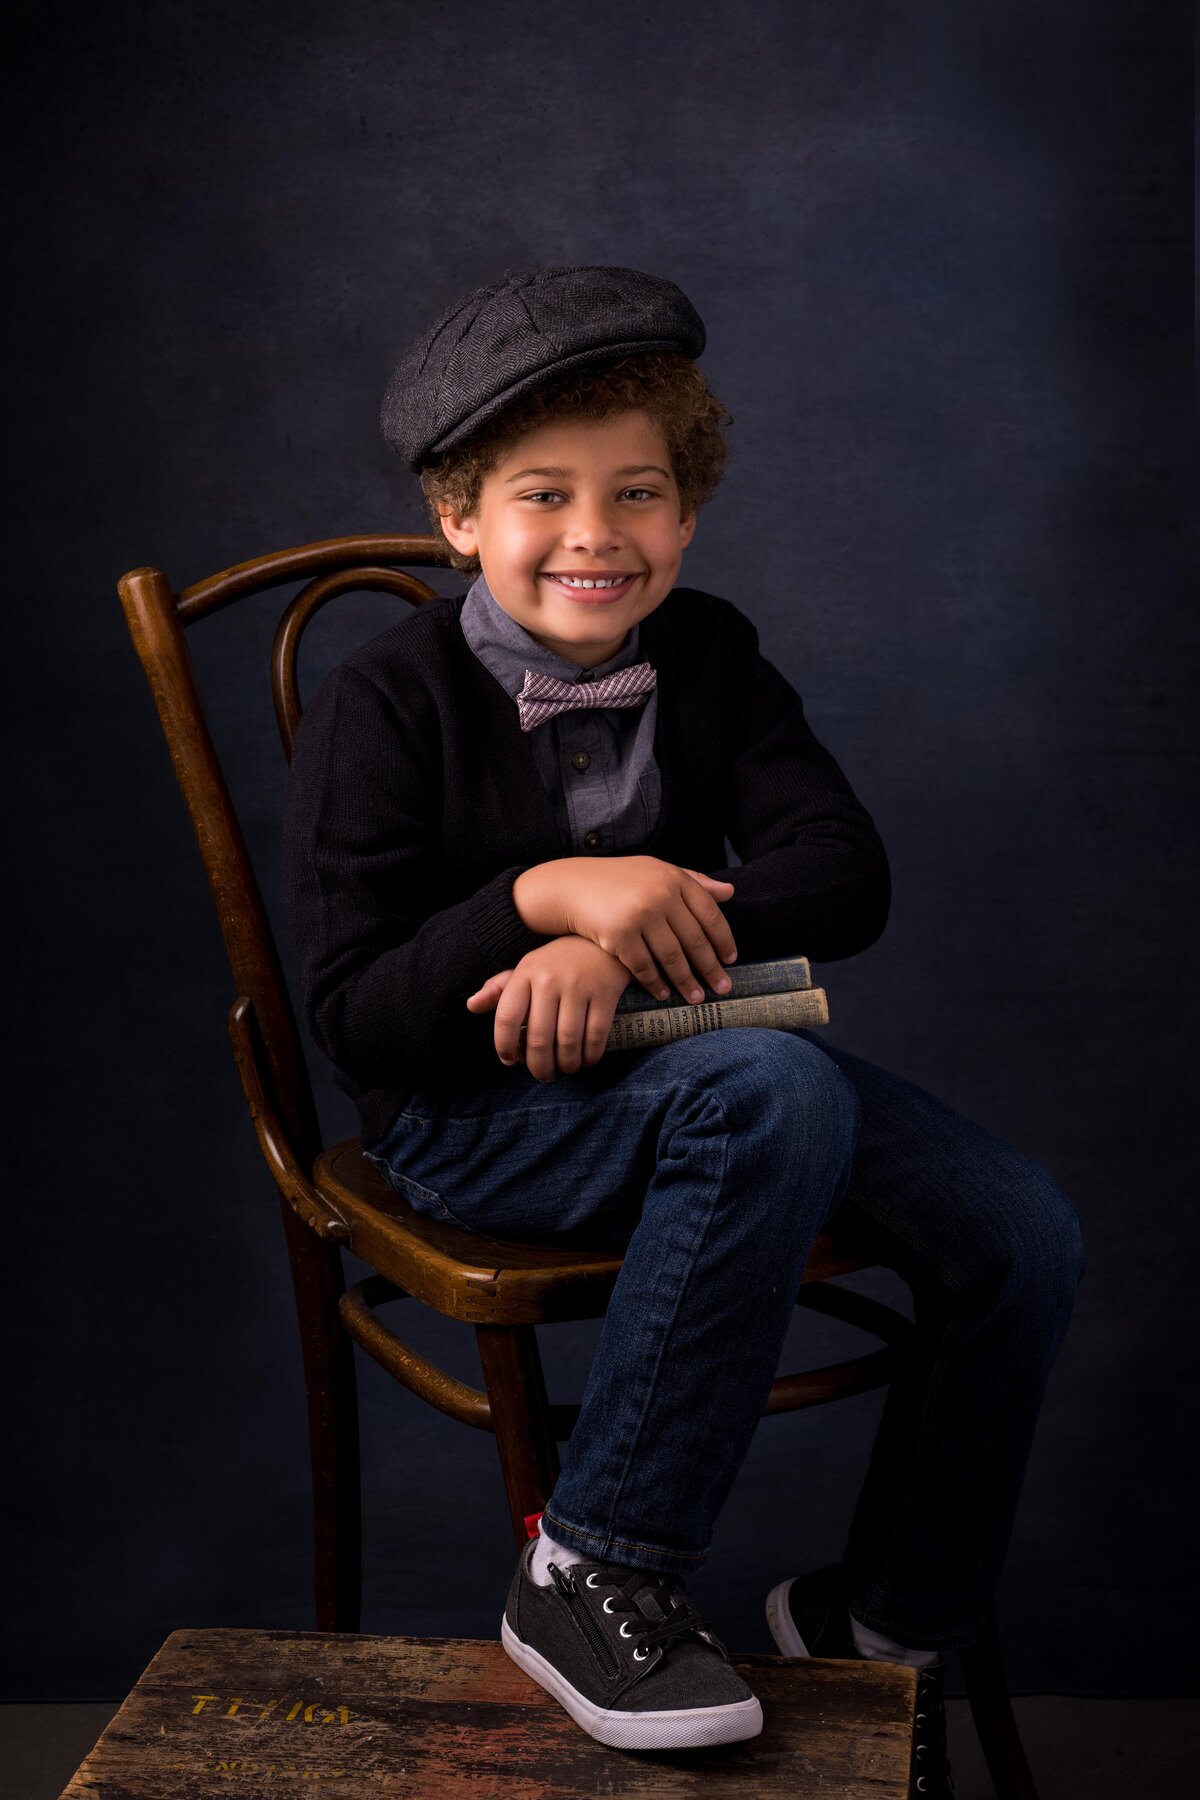 Young boy with cap sitting